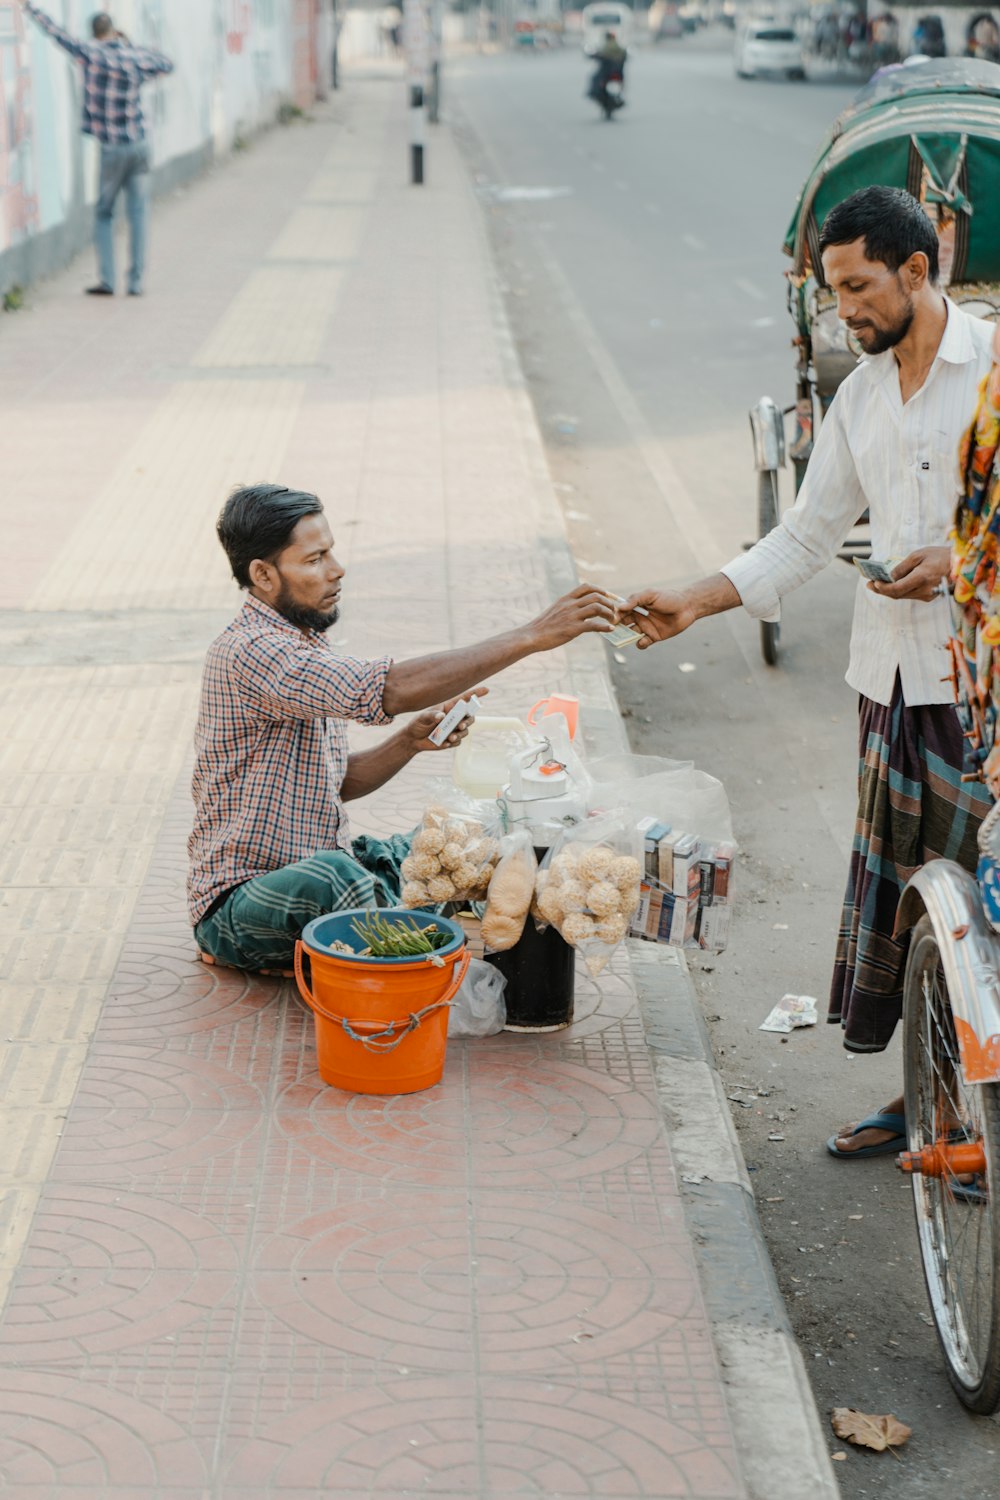 a man handing food to another man on a bike